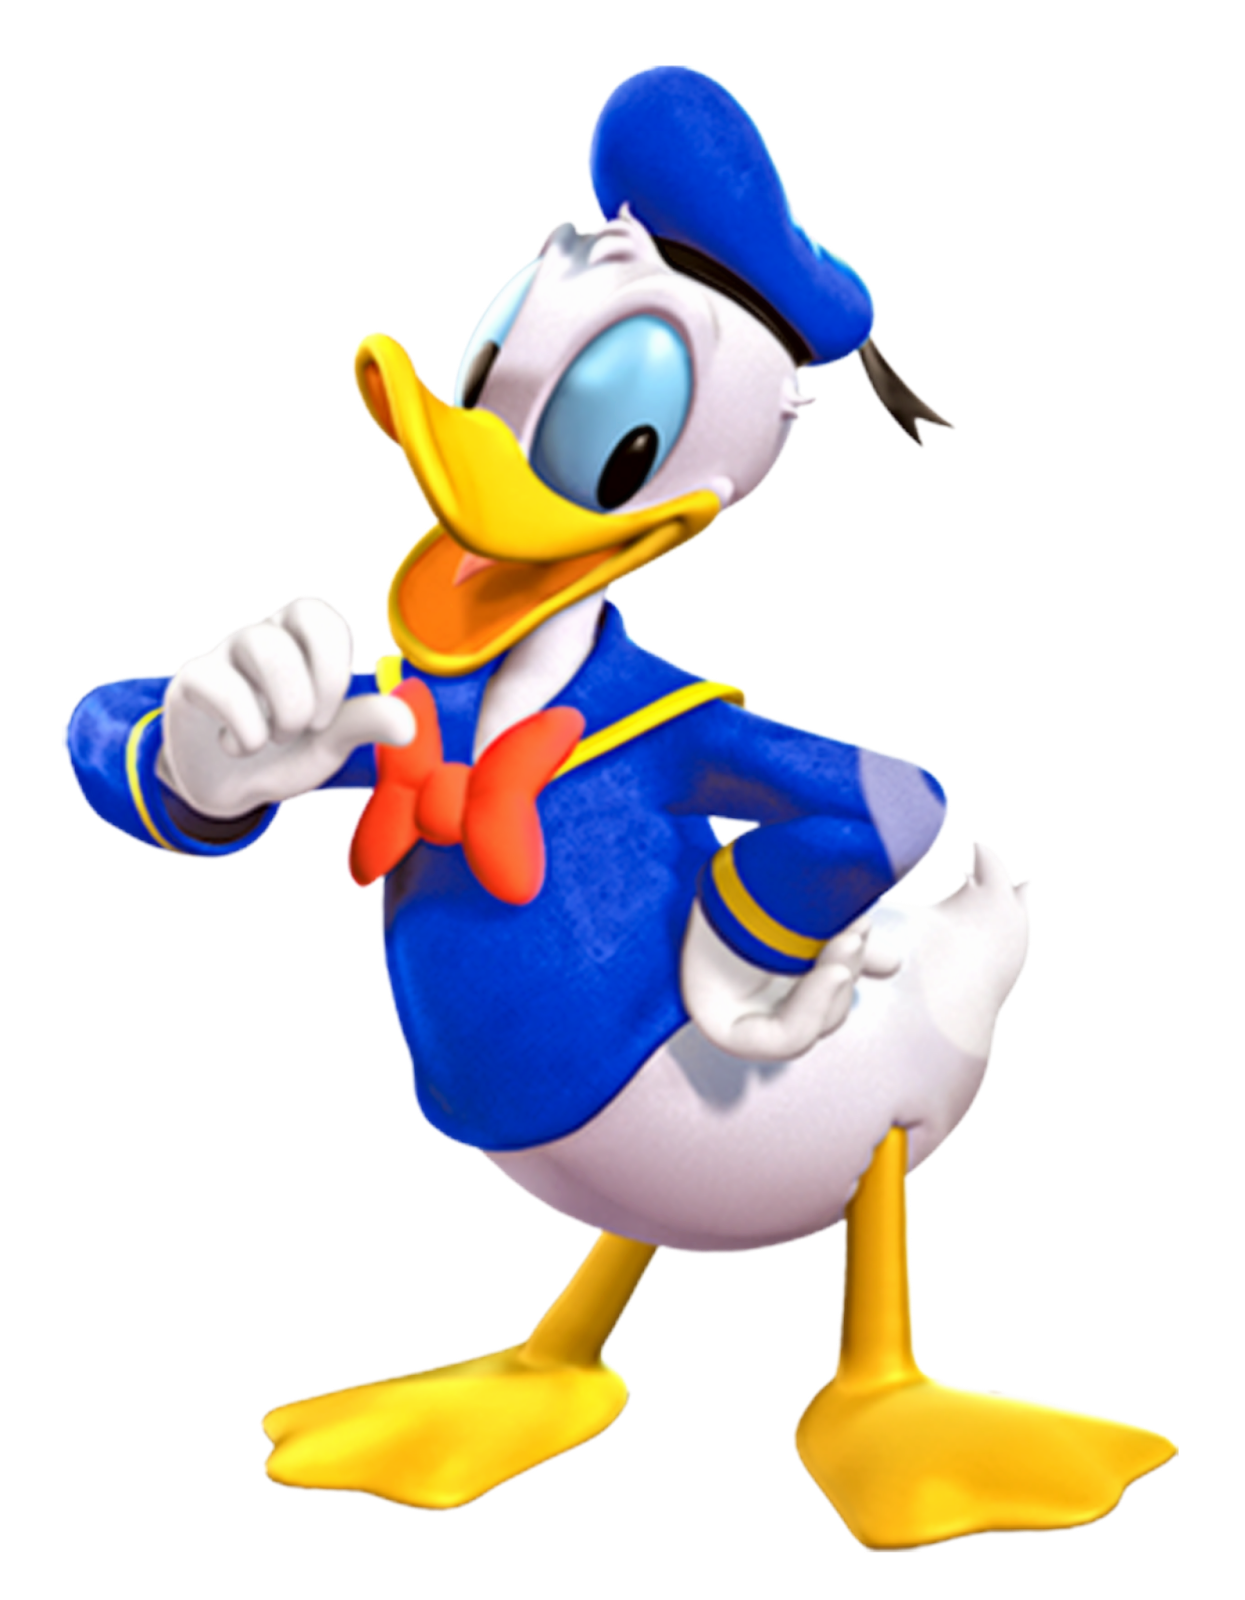 Mickey Mouse Minnie Mouse Goofy Pluto Donald Duck Mickey Mouse Png Images